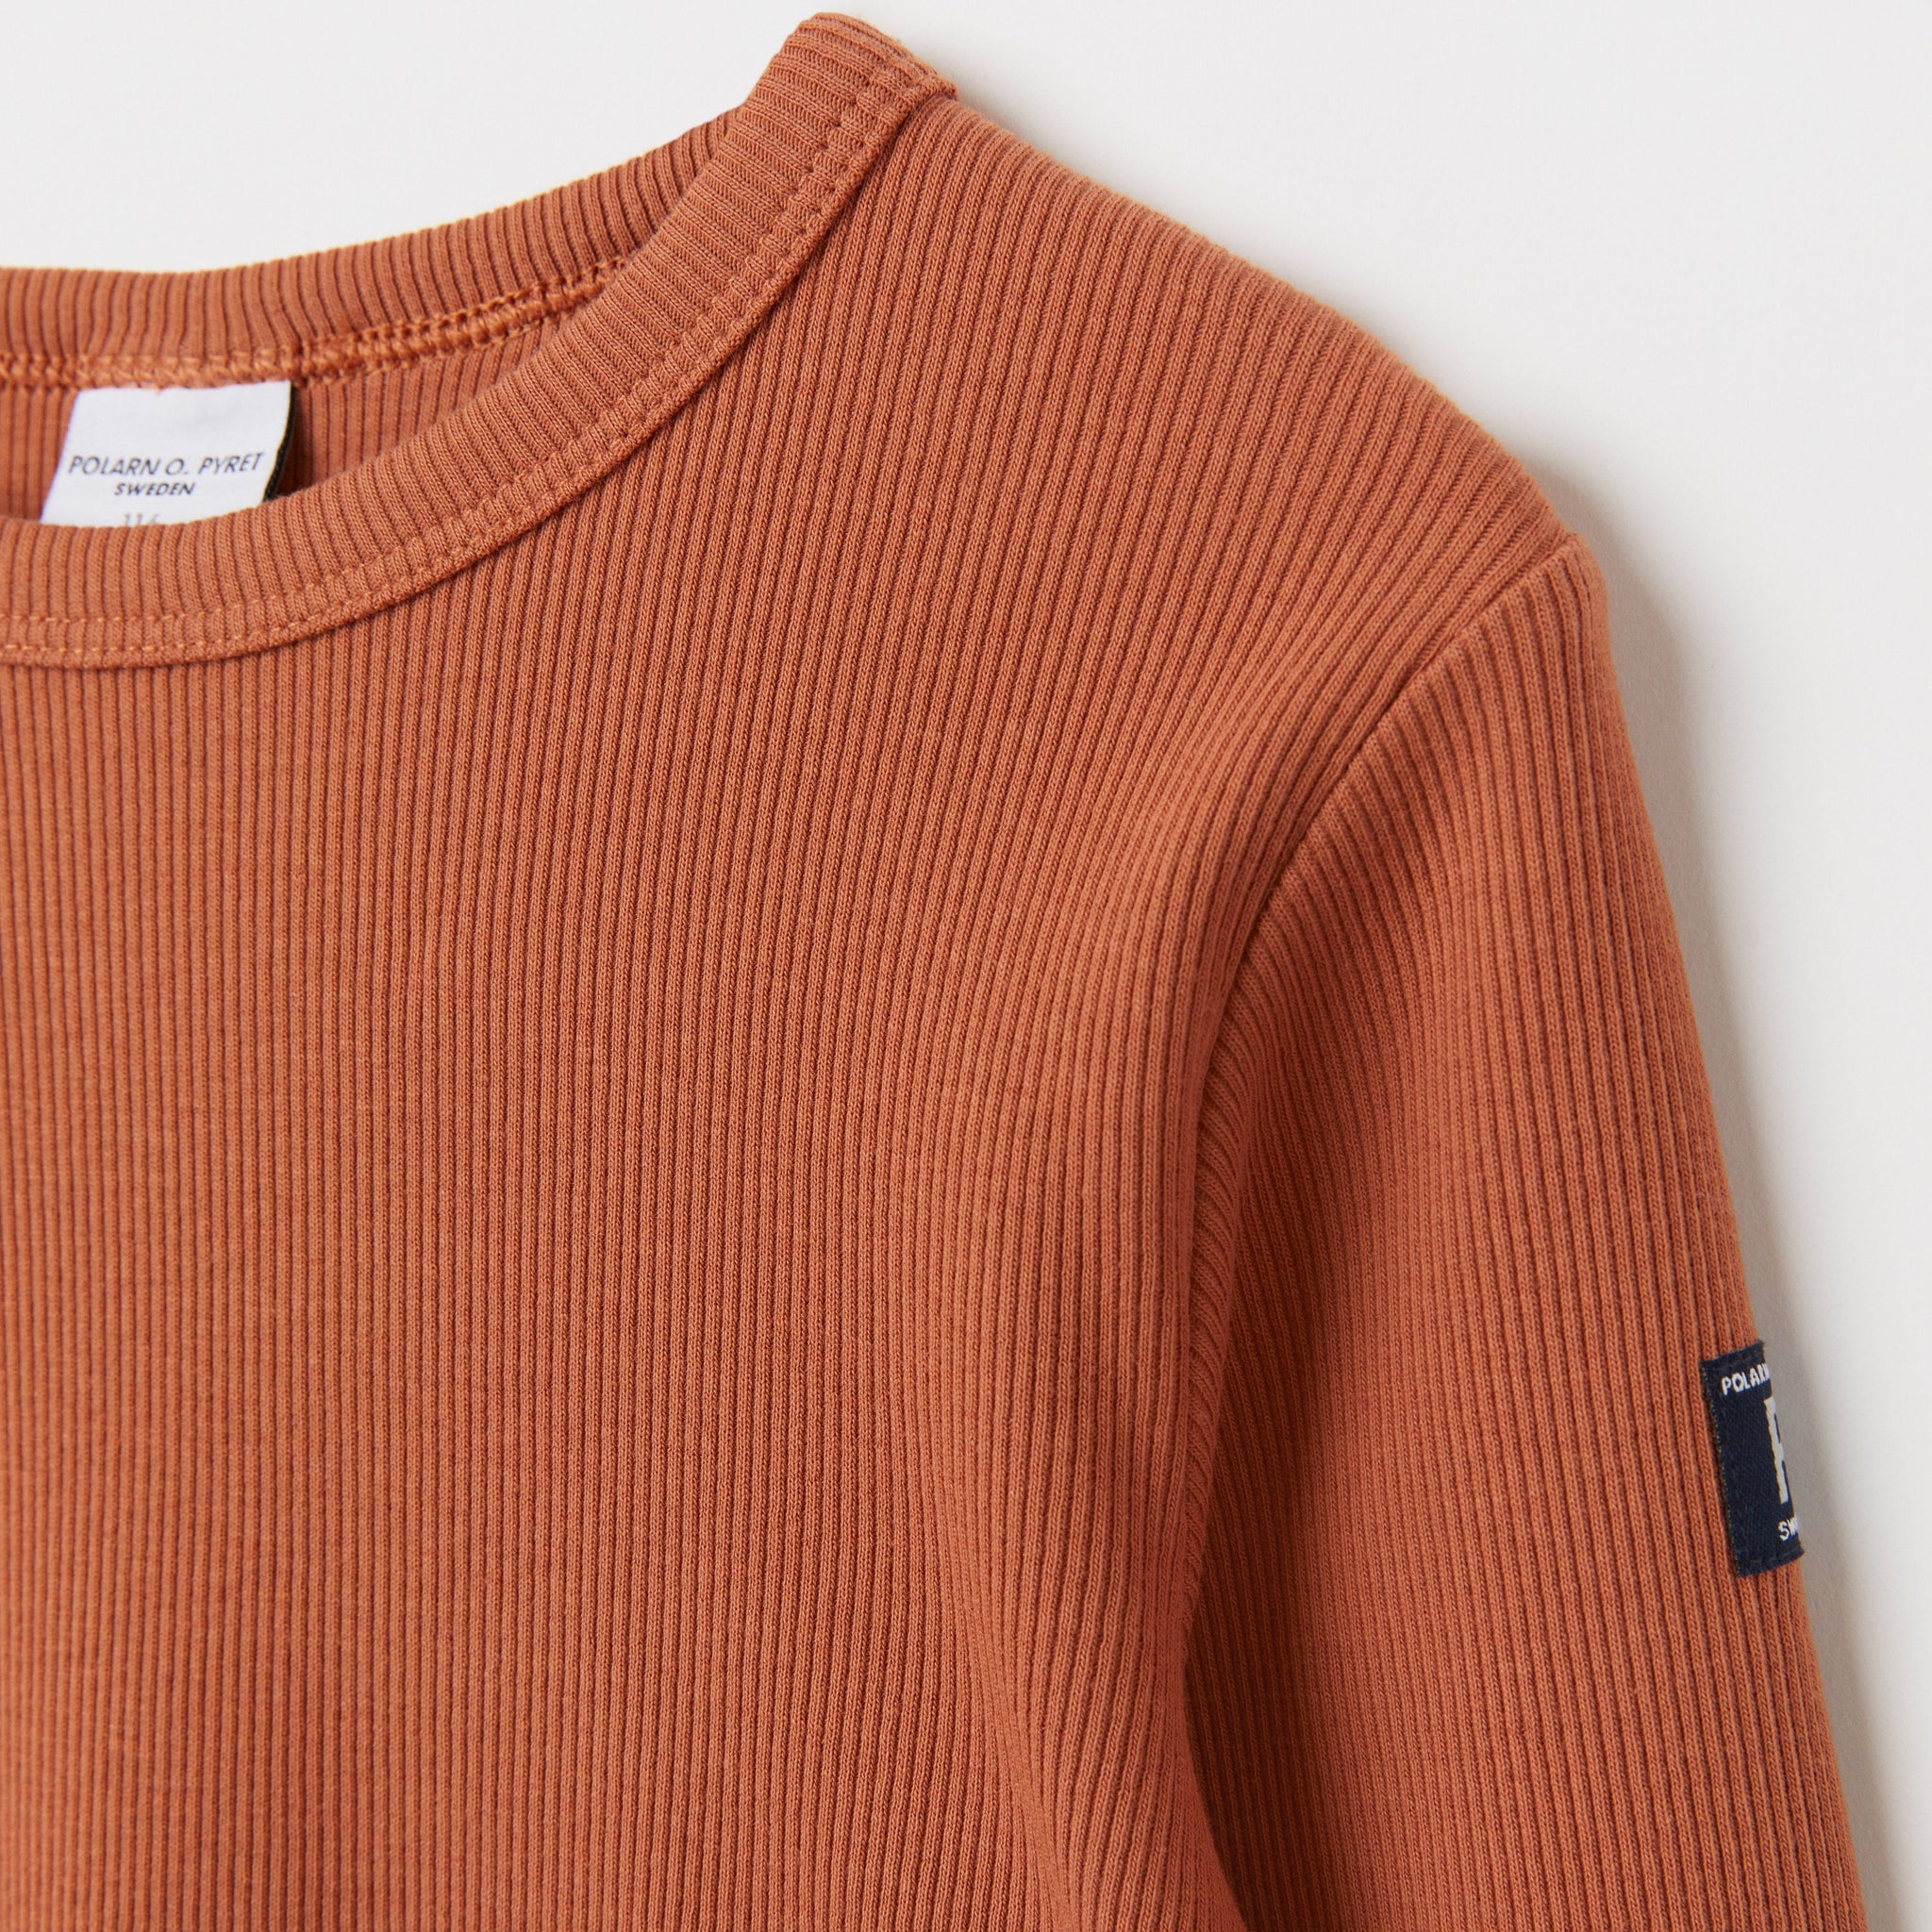 Orange Ribbed Kids Top from the Polarn O. Pyret Kidswear collection. The best ethical kids clothes